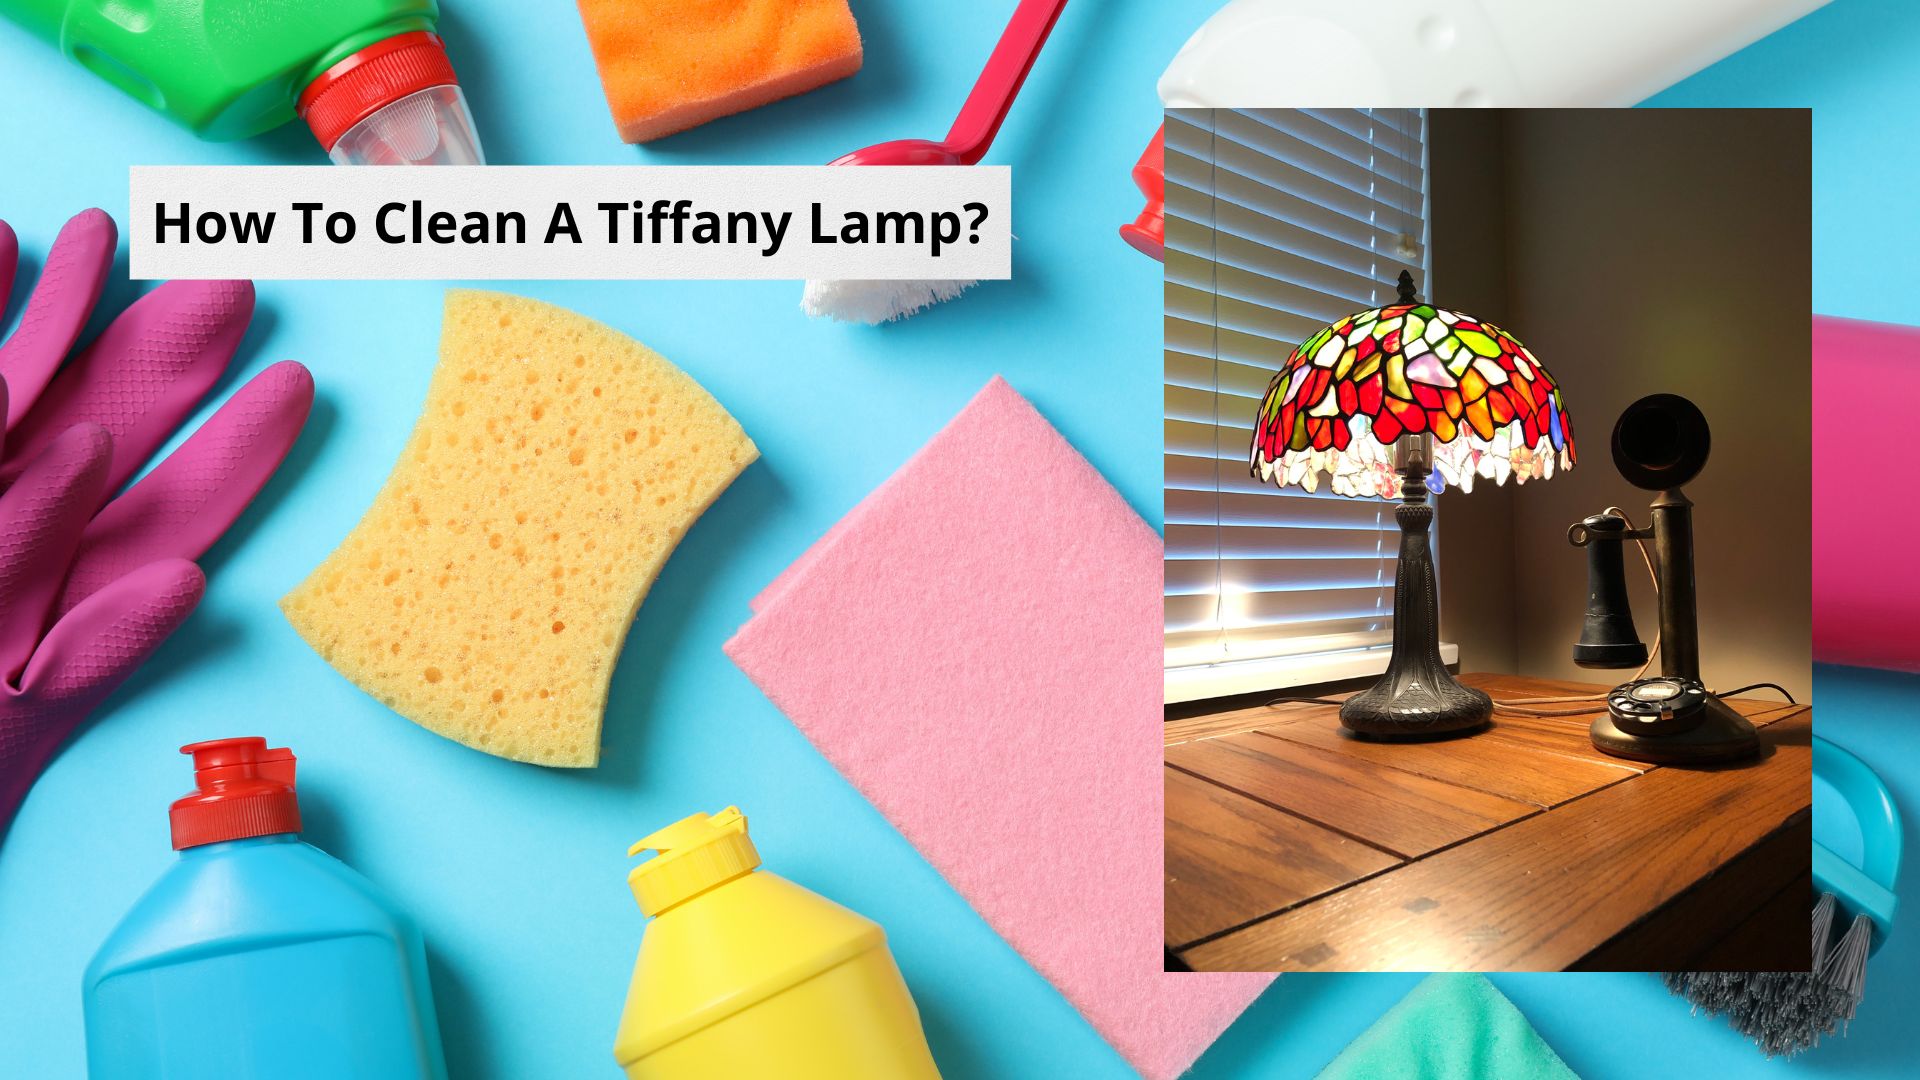 Image depicting a table top Tiffany Lamp alongside a range of cleaning equipment with the text slogan asking "How To Clean A Tiffany Lamp"?